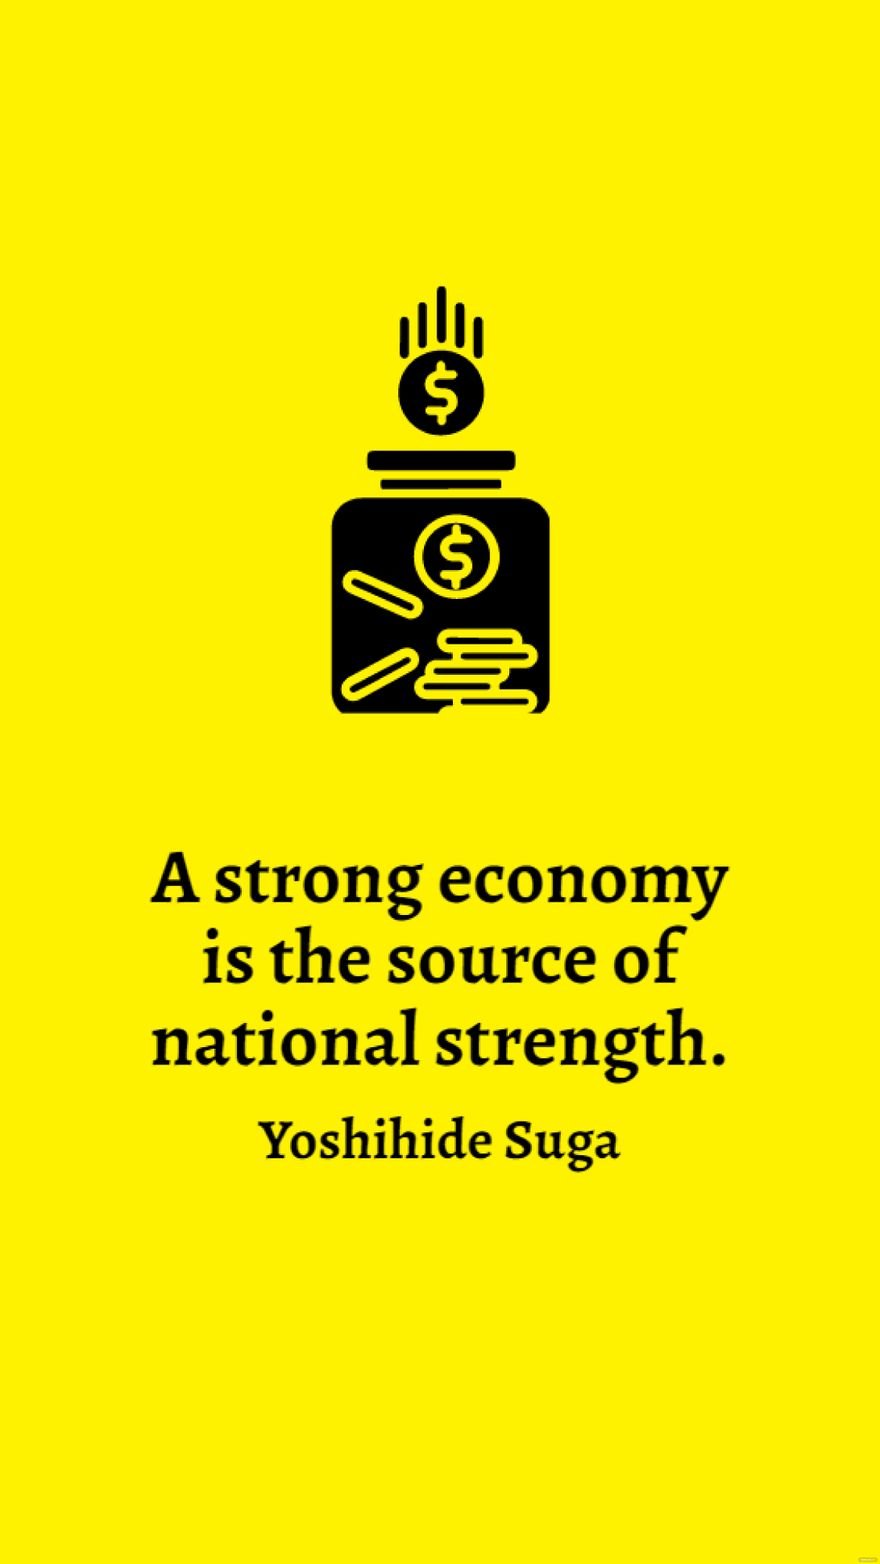 Yoshihide Suga - A strong economy is the source of national strength.